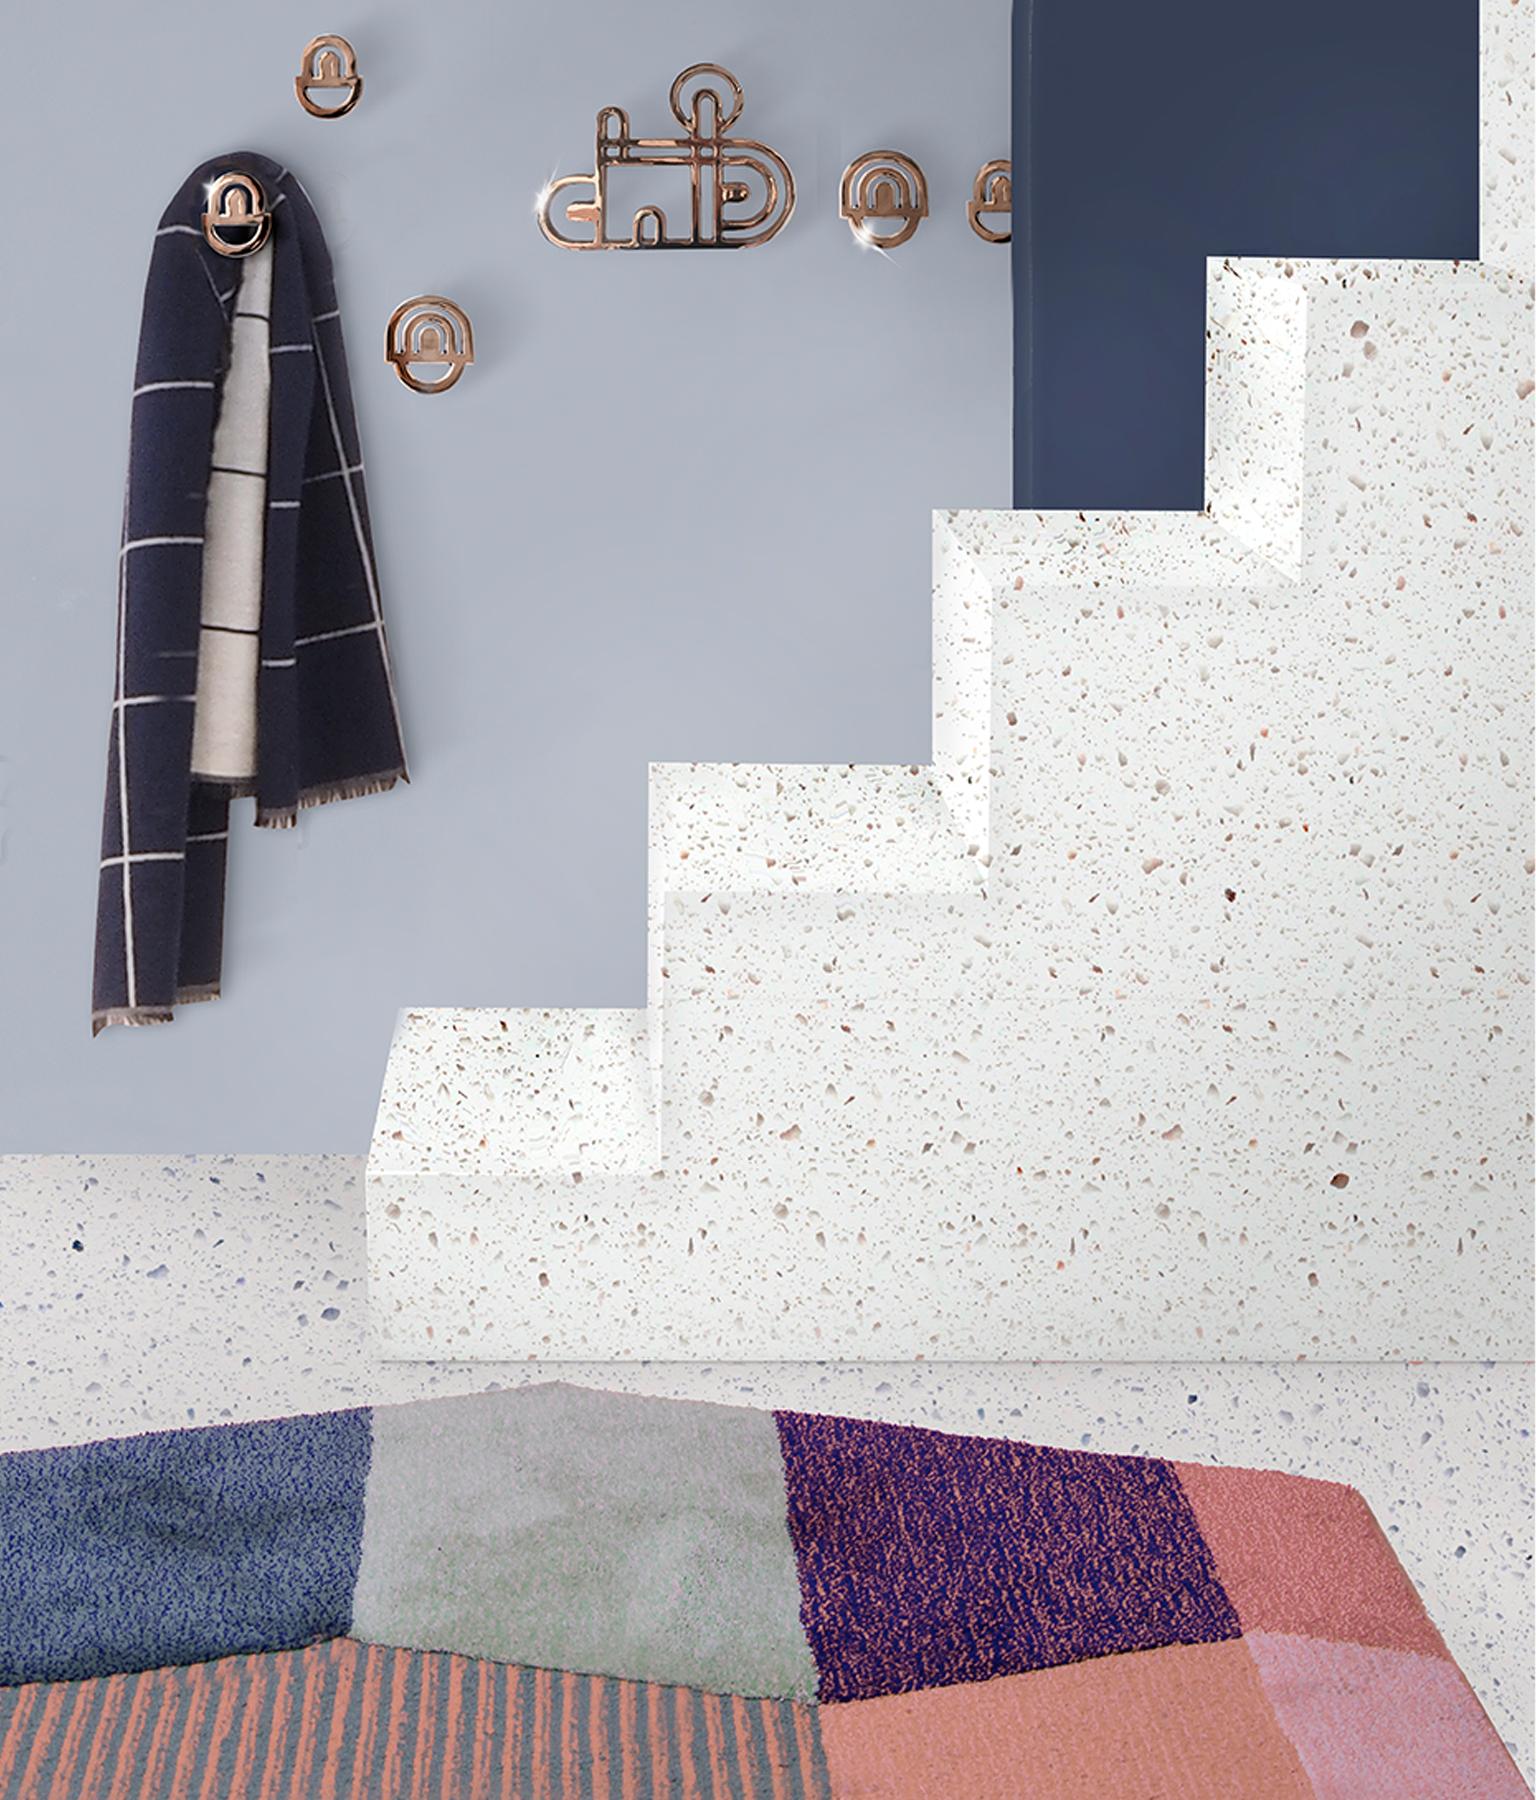 100% top quality New Zealand wool tufted rug
Designed by Seraina Lareida
Made in Italy

Sottovolto design is inspired by the view of the Venetian porches prospective, which they characterize the lagoon city.
Walking on, you can feel the